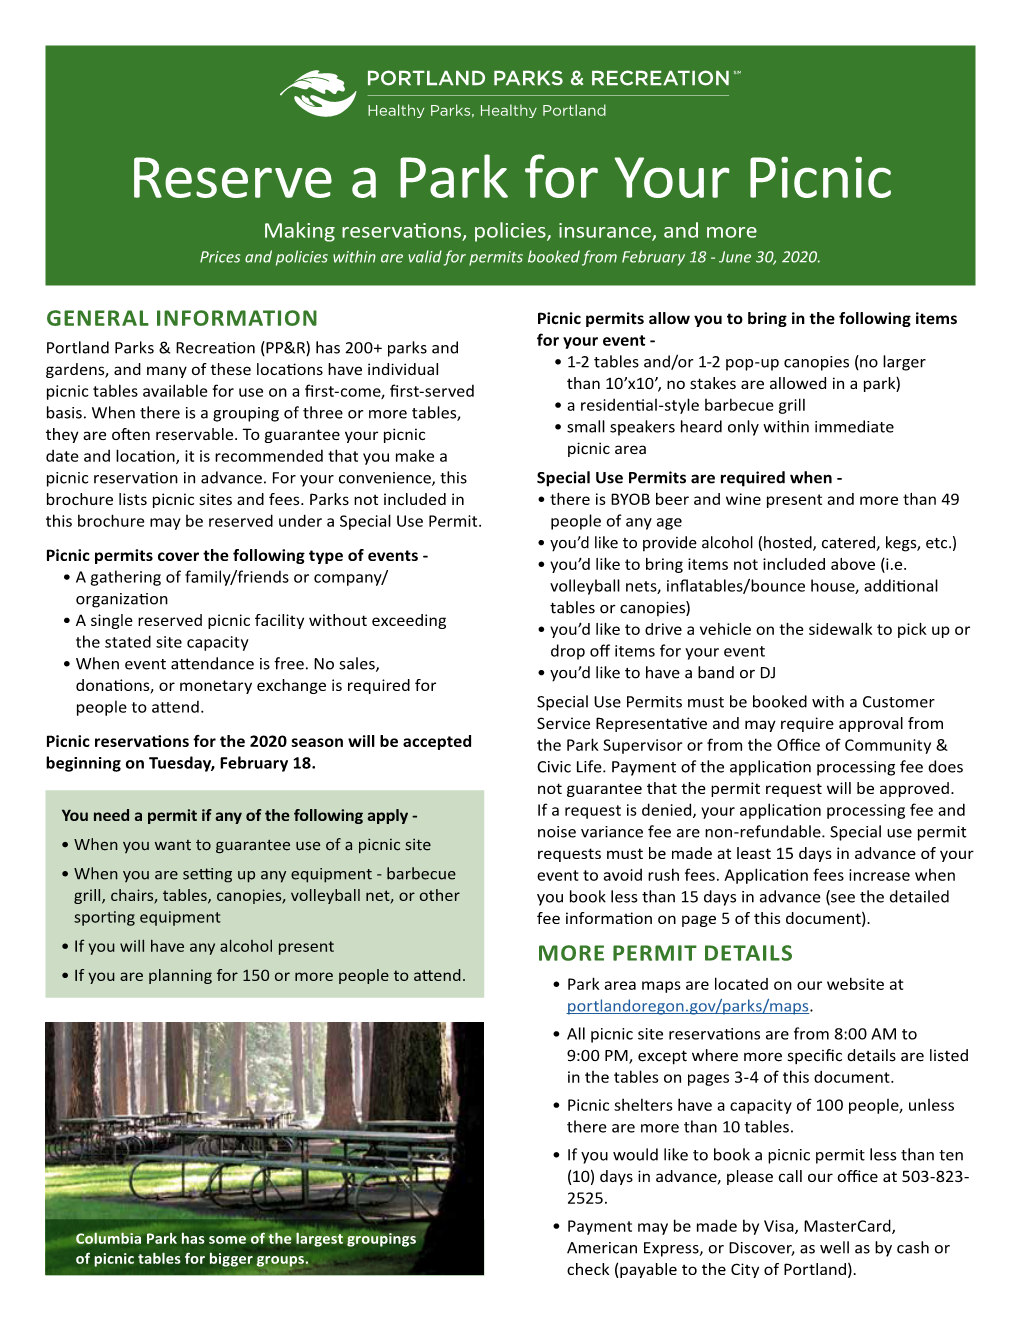 Reserve a Park for Your Picnic